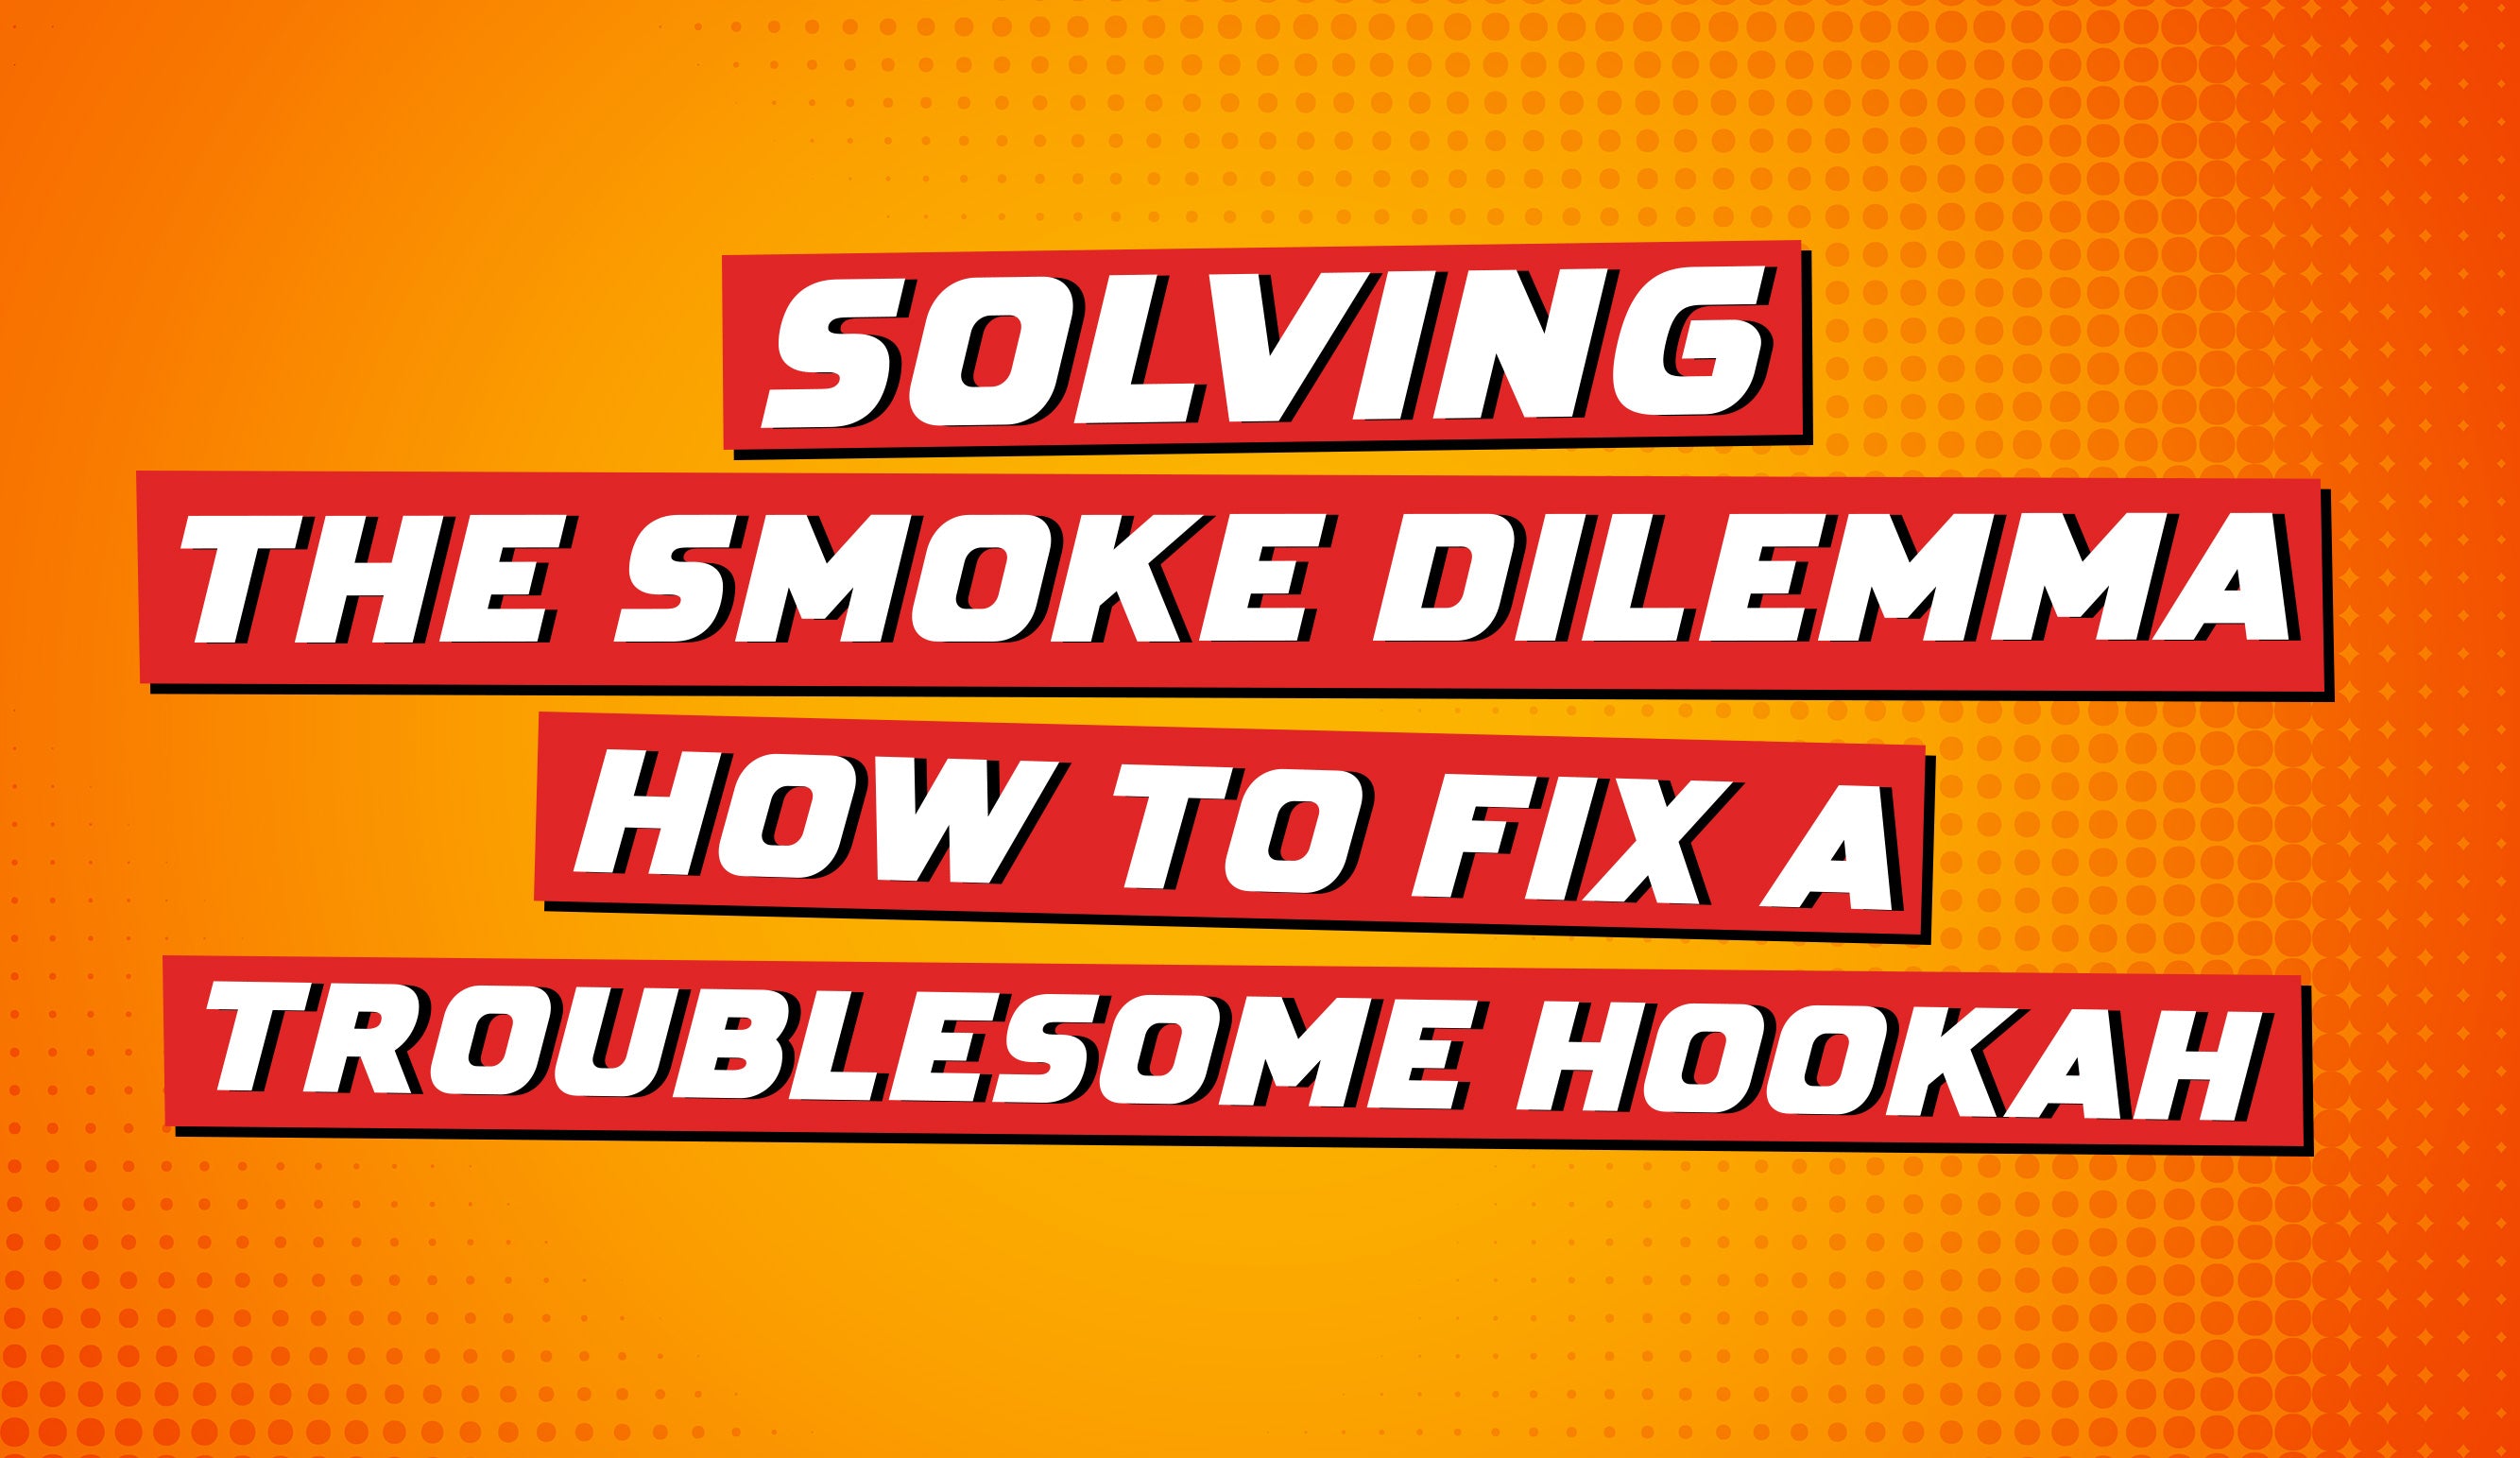 Solving the Smoke Dilemma: How to Fix a Troublesome Hookah